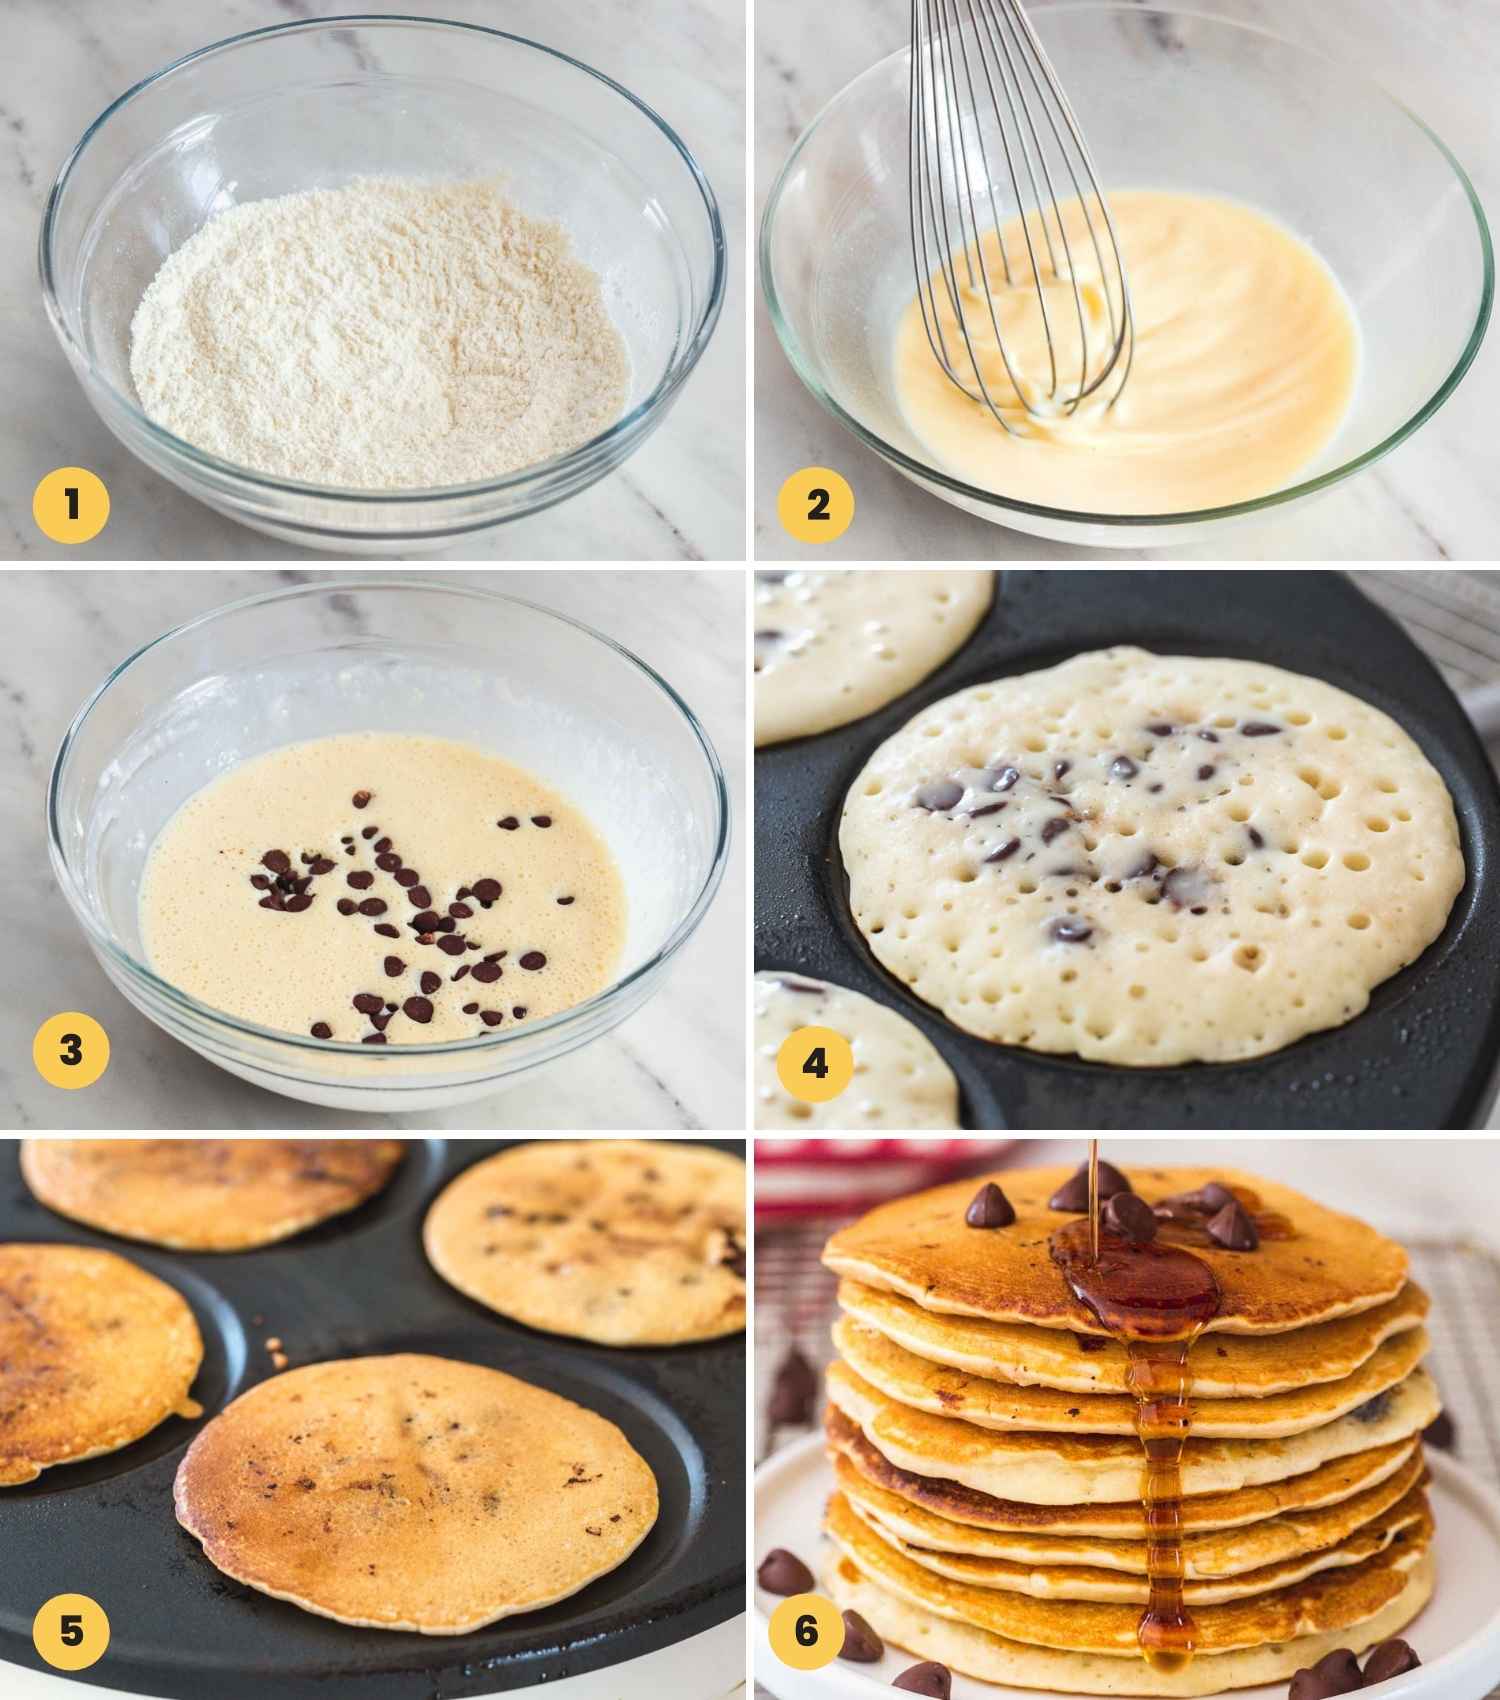 A collage with six images showing how to make chocolate chip pancakes